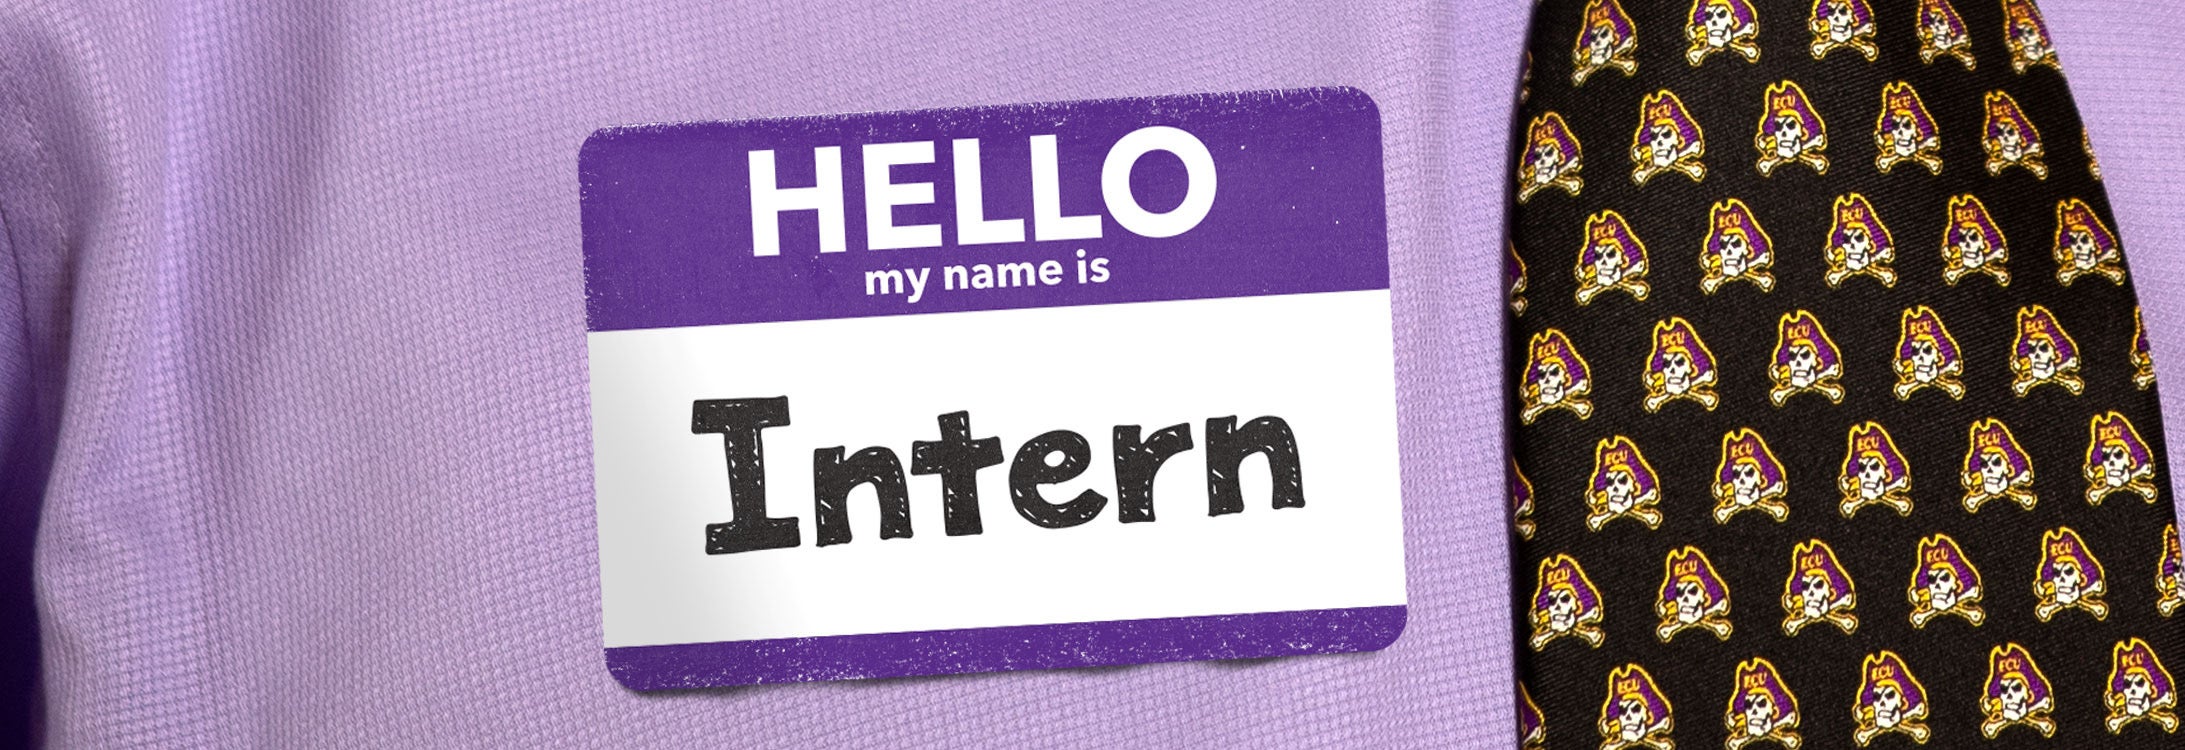 Hello my name is intern image